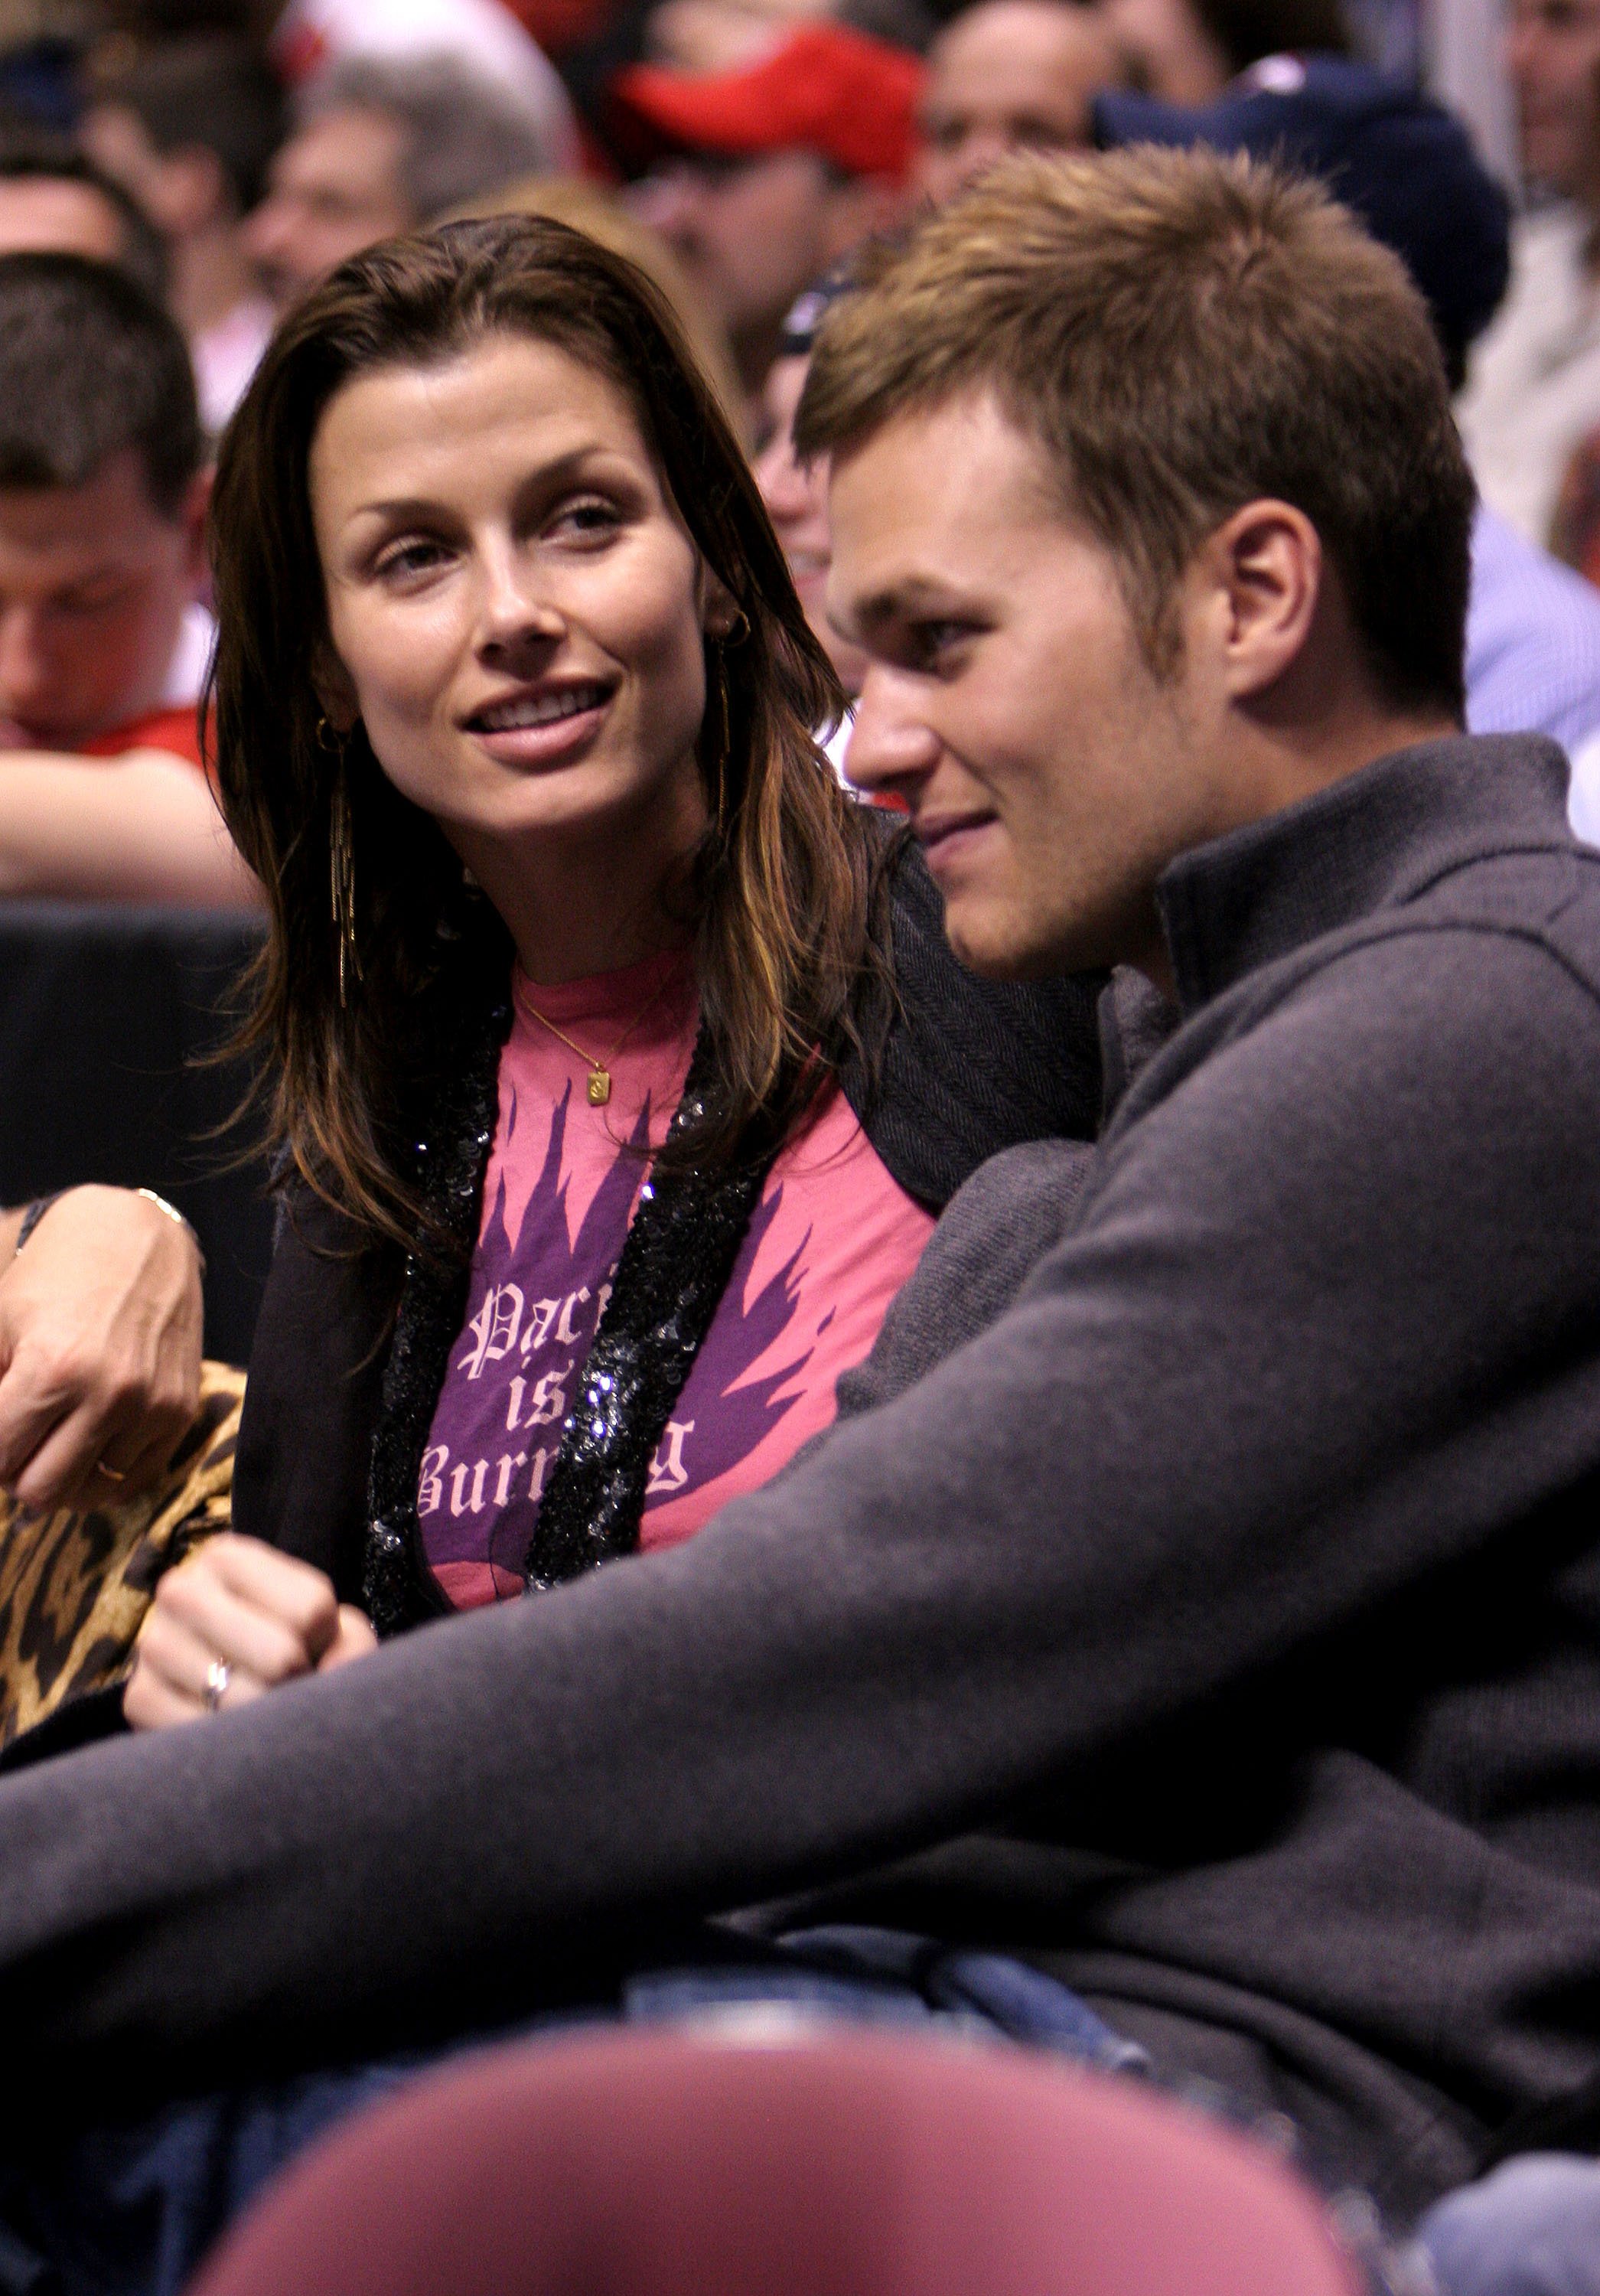 Bridget Moynahan and Tom Brady during Celebrities Attend Miami Heat Vs New Jersey Nets Playoff Game - May 12, 2006, at Continental Arena in East Rutherford, New Jersey, United States. | Source: Getty Images